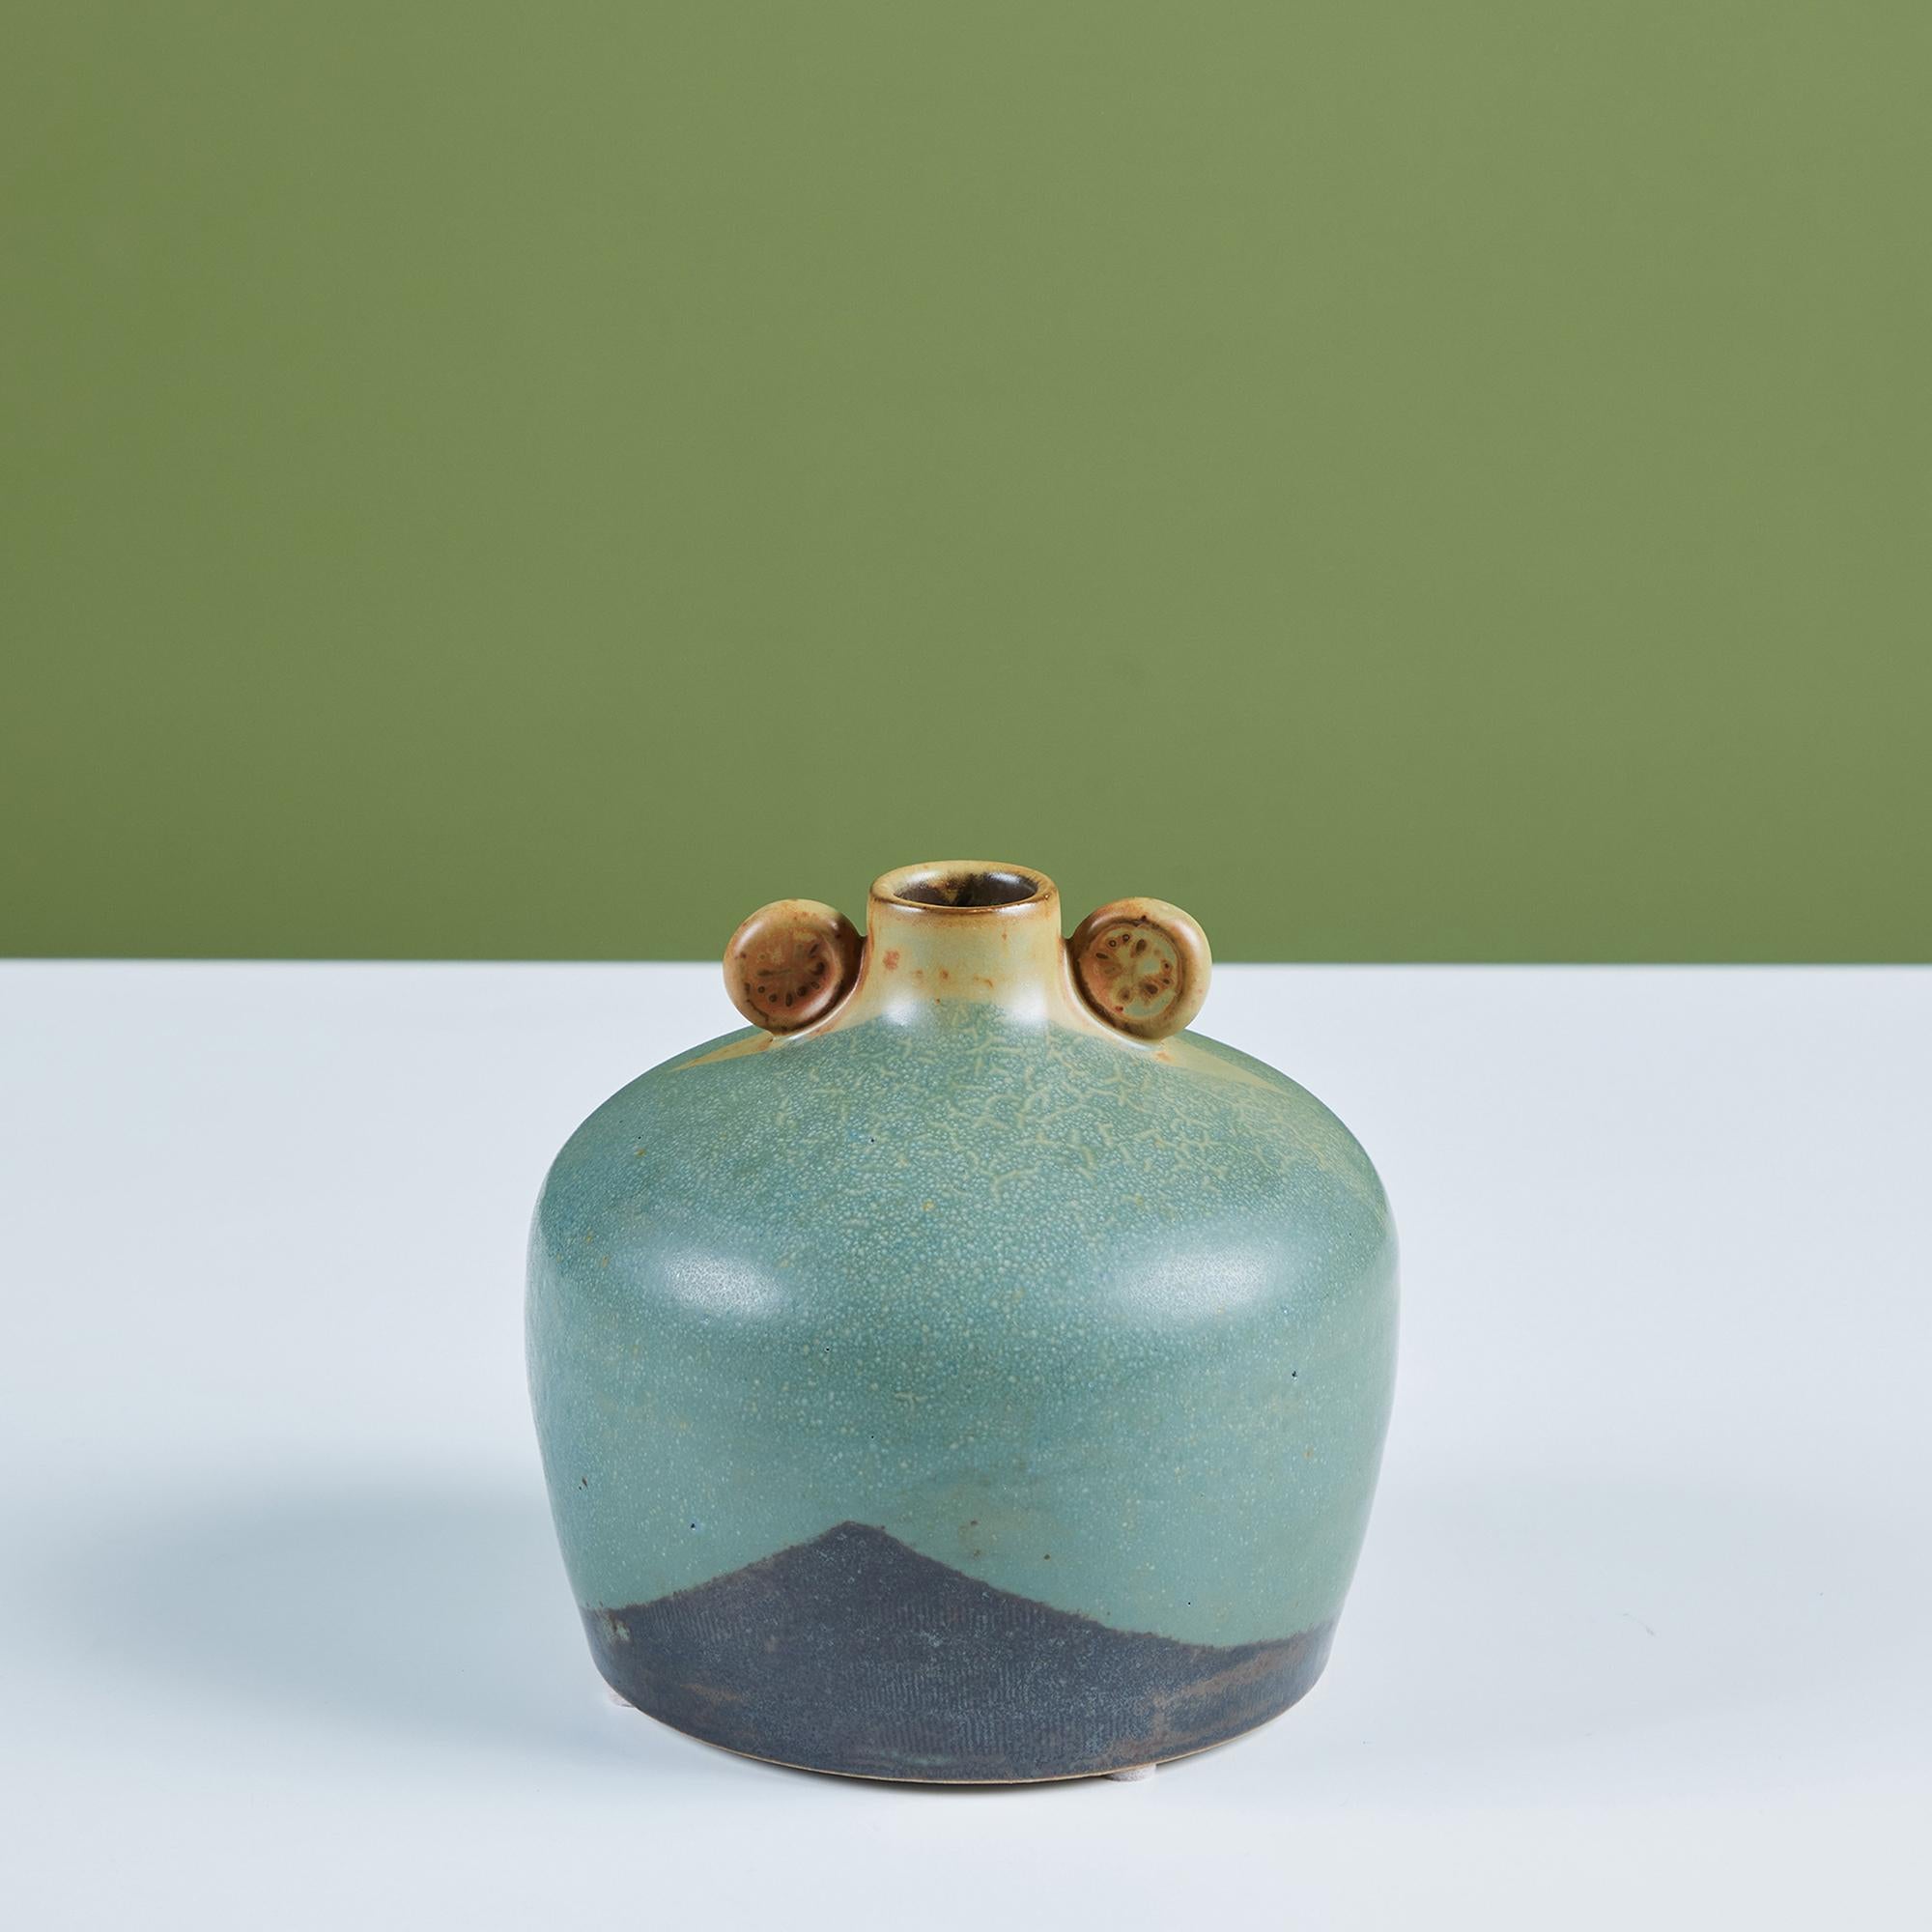 A rounded studio pottery bud vase with a two tone blue glaze and small rounded handles at the mouth of the vase.

Dimensions
5.5” diameter x 5.5” height; 1